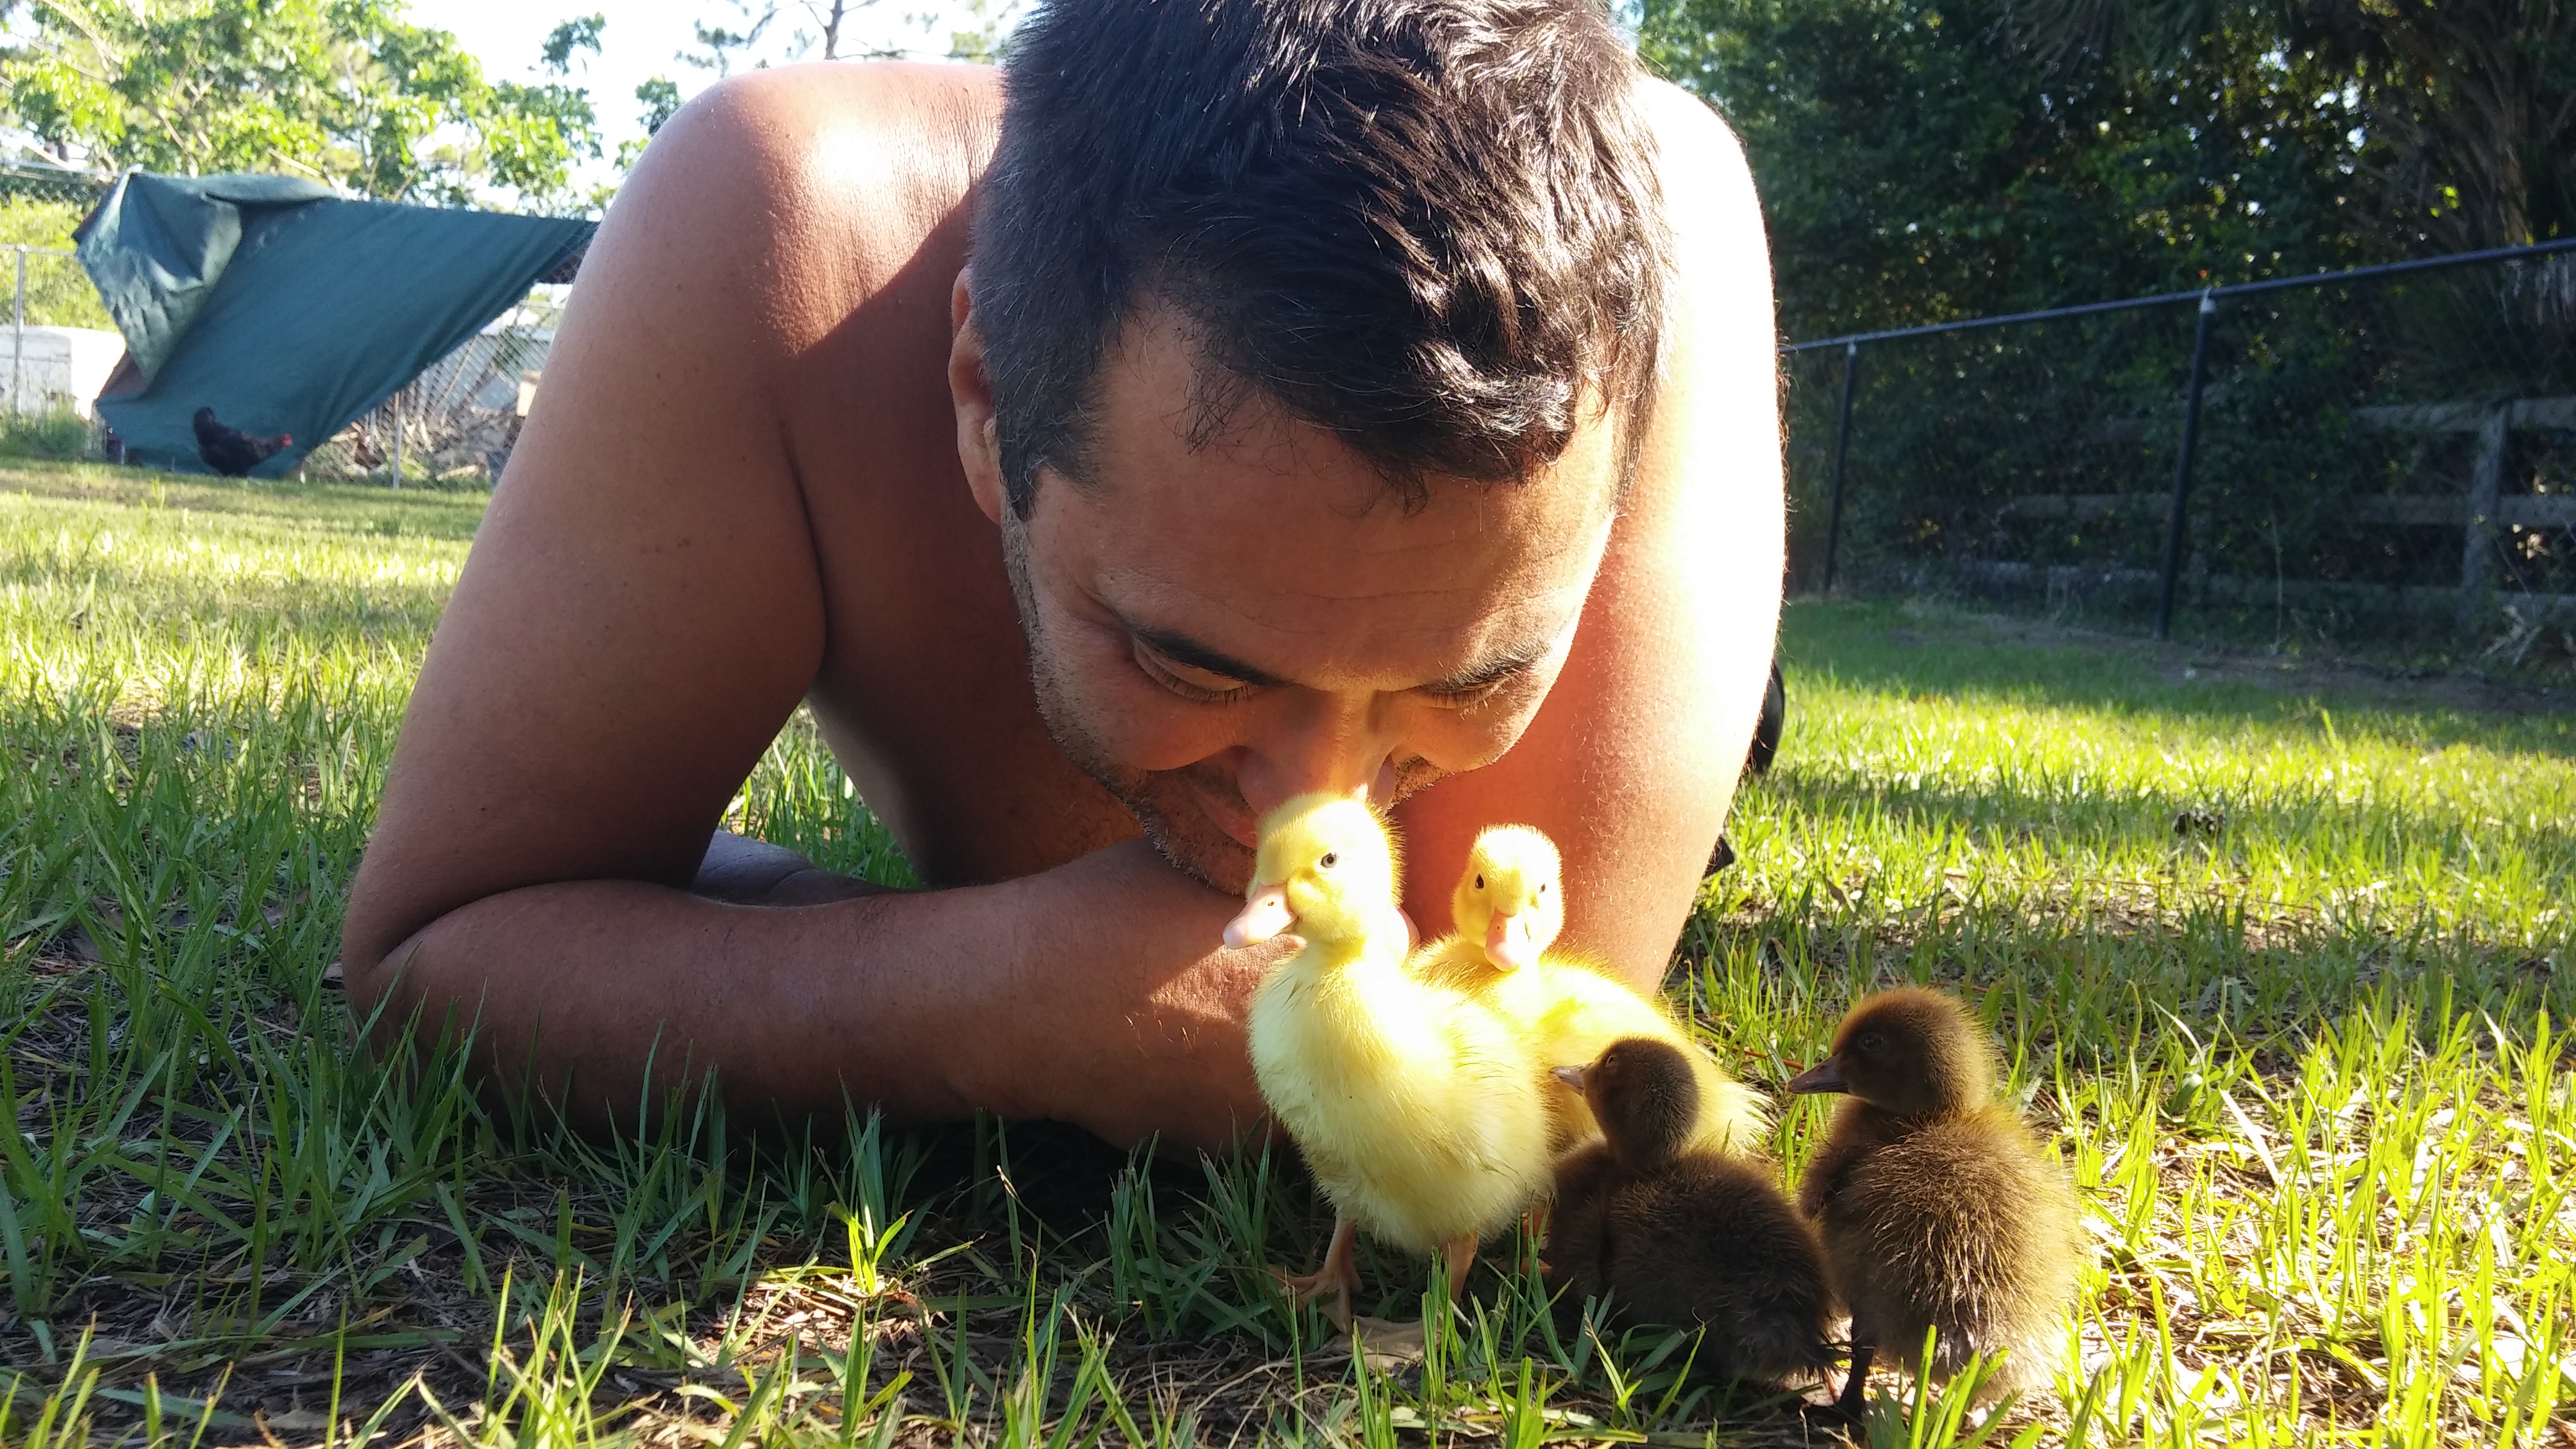 Ducklings are the coolest things in the world!!!